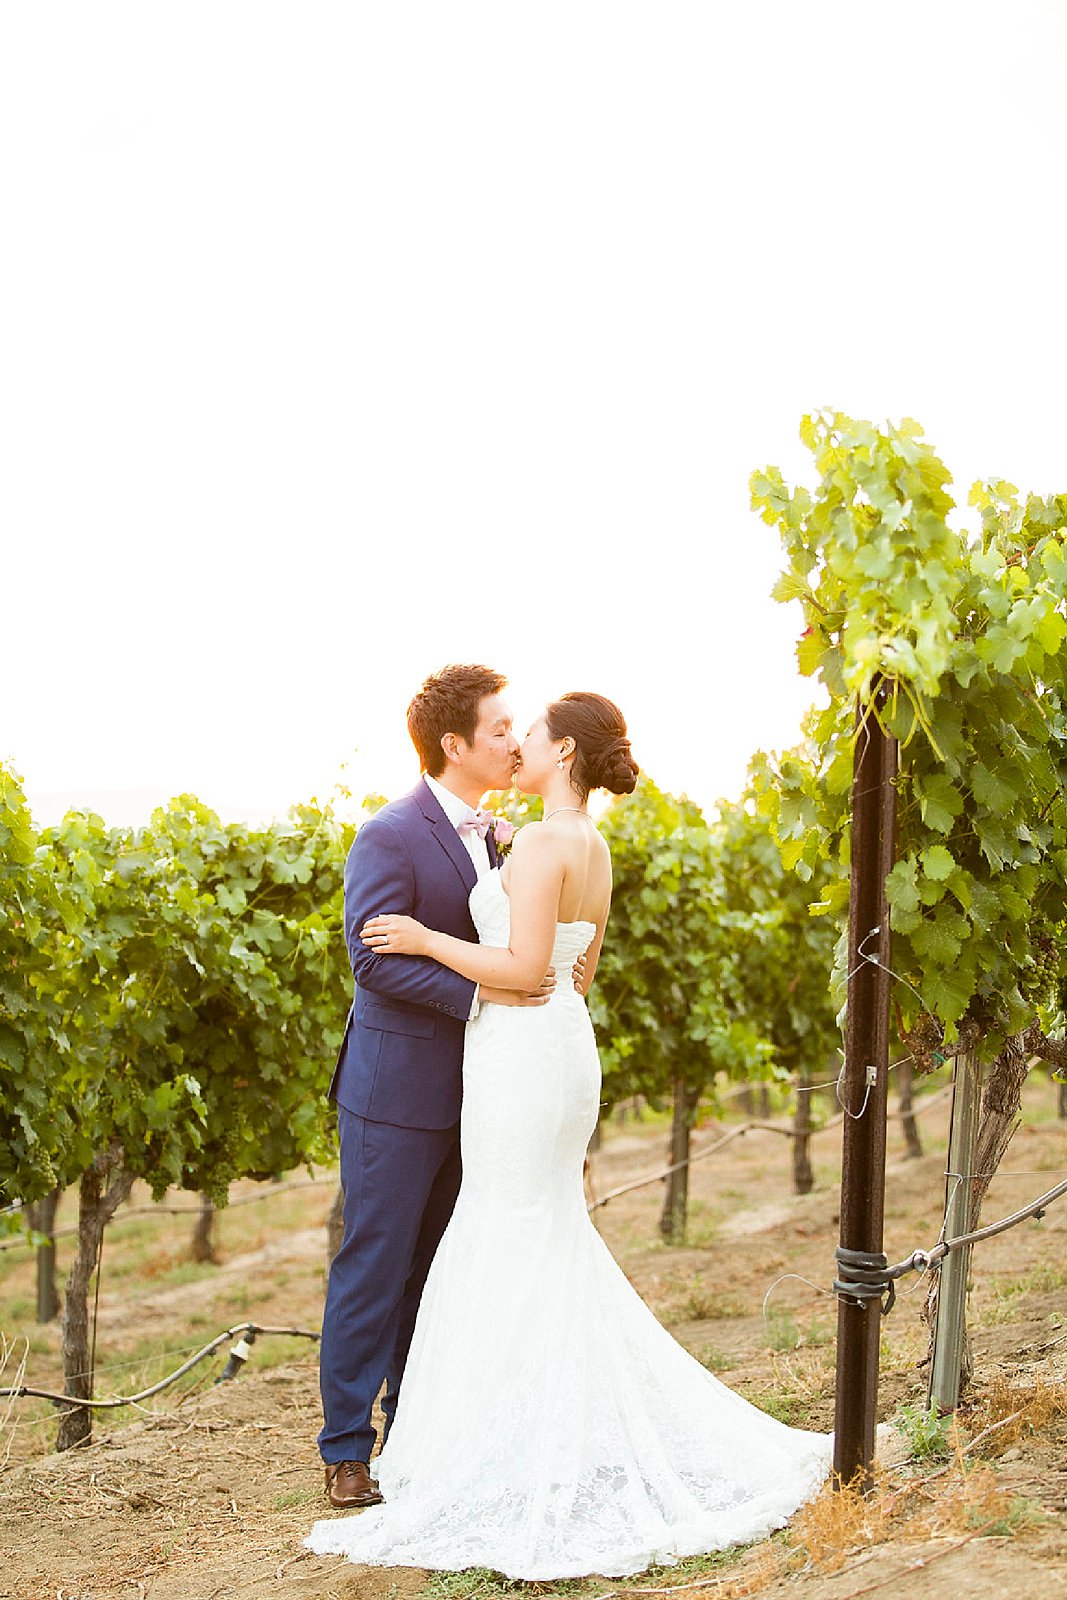 wedding portraits in Falkner Winery vines photographed by Randi Michelle Photography